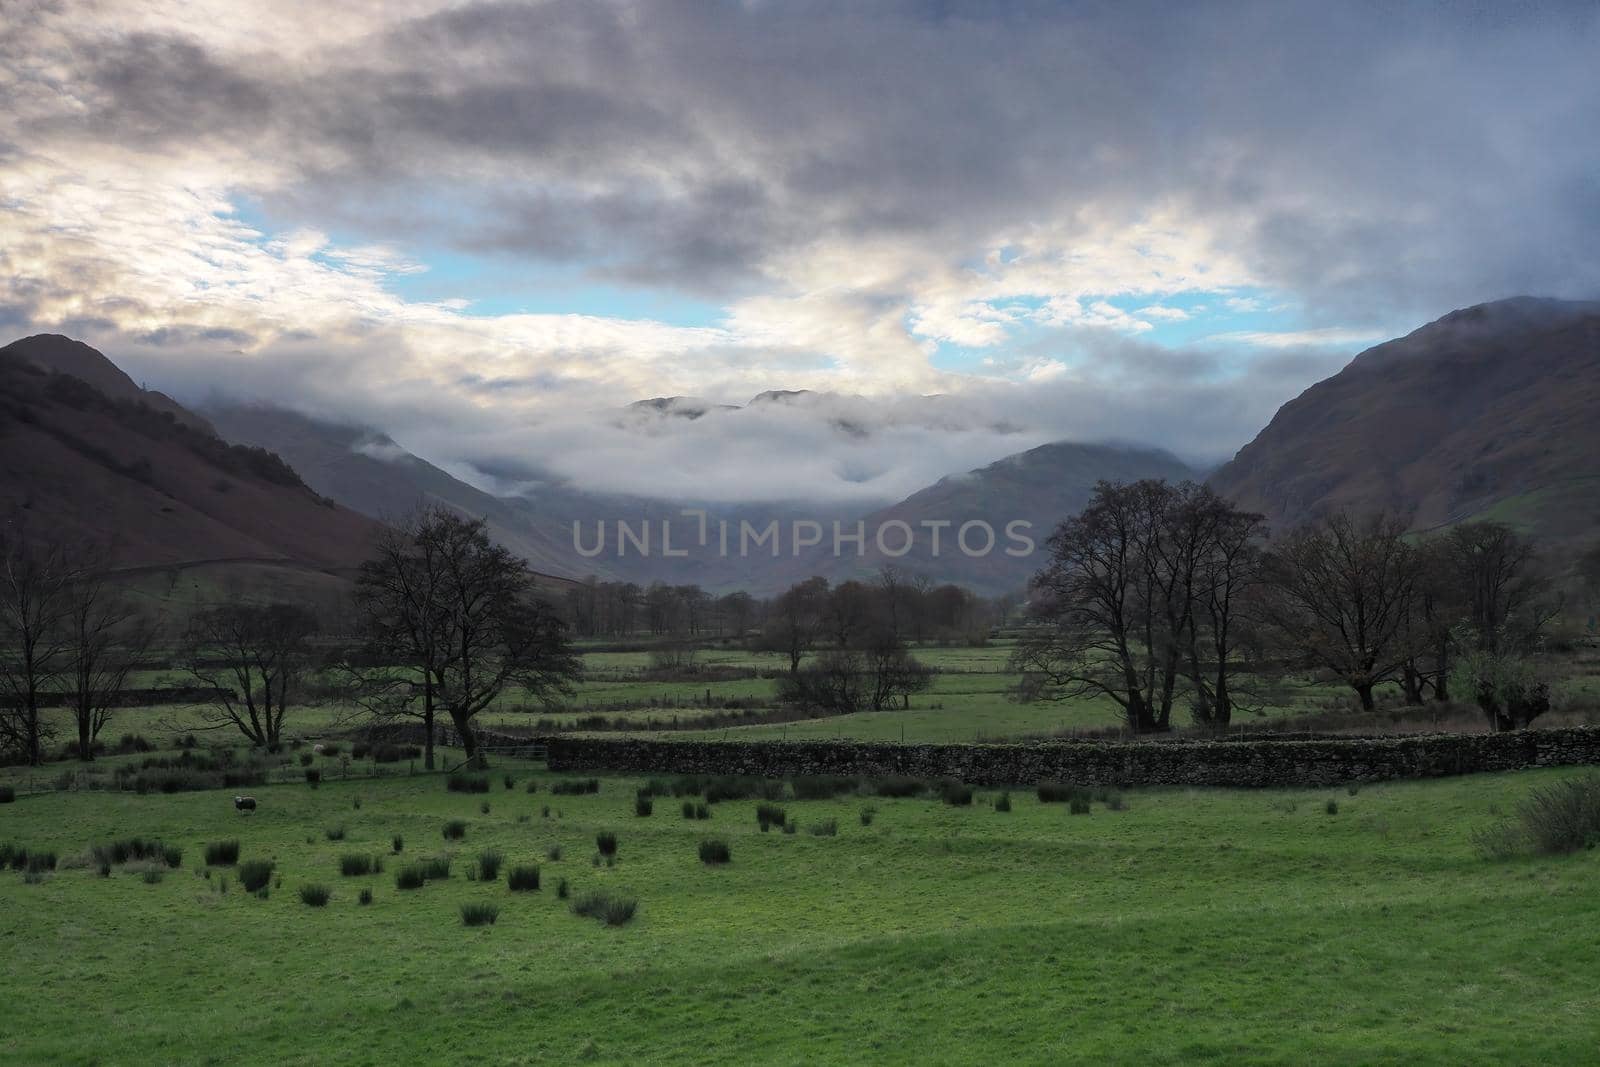 View across the fields to the Langdale Pikes at sunset as the clouds started to part over the peaks, Lake District, UK